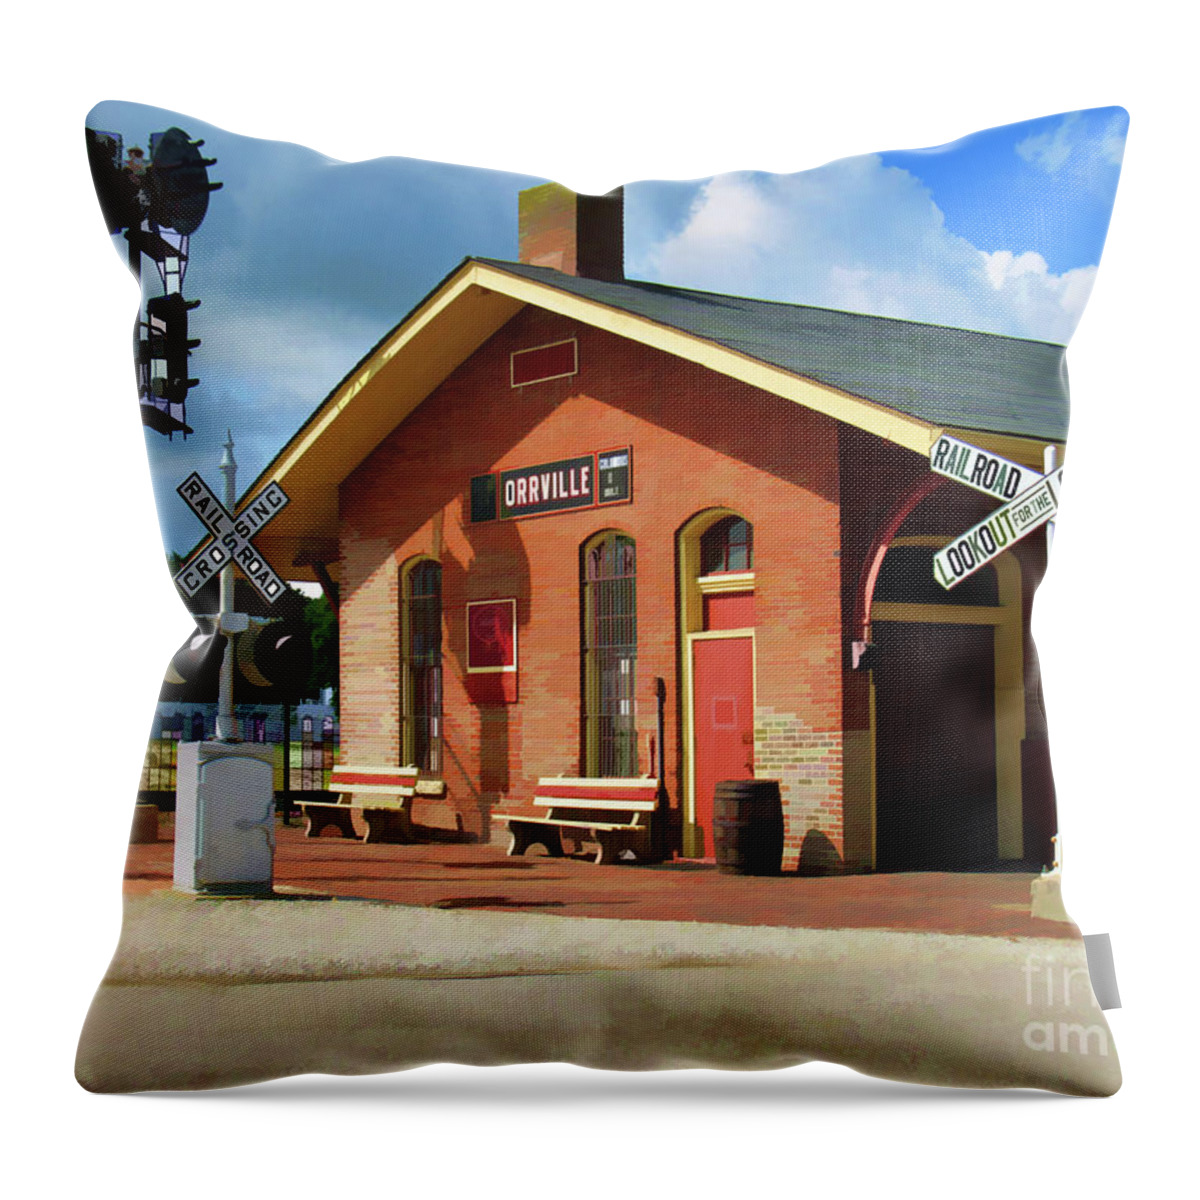 Orrville Ohio Throw Pillow featuring the photograph Orrville Train Station by Roberta Byram